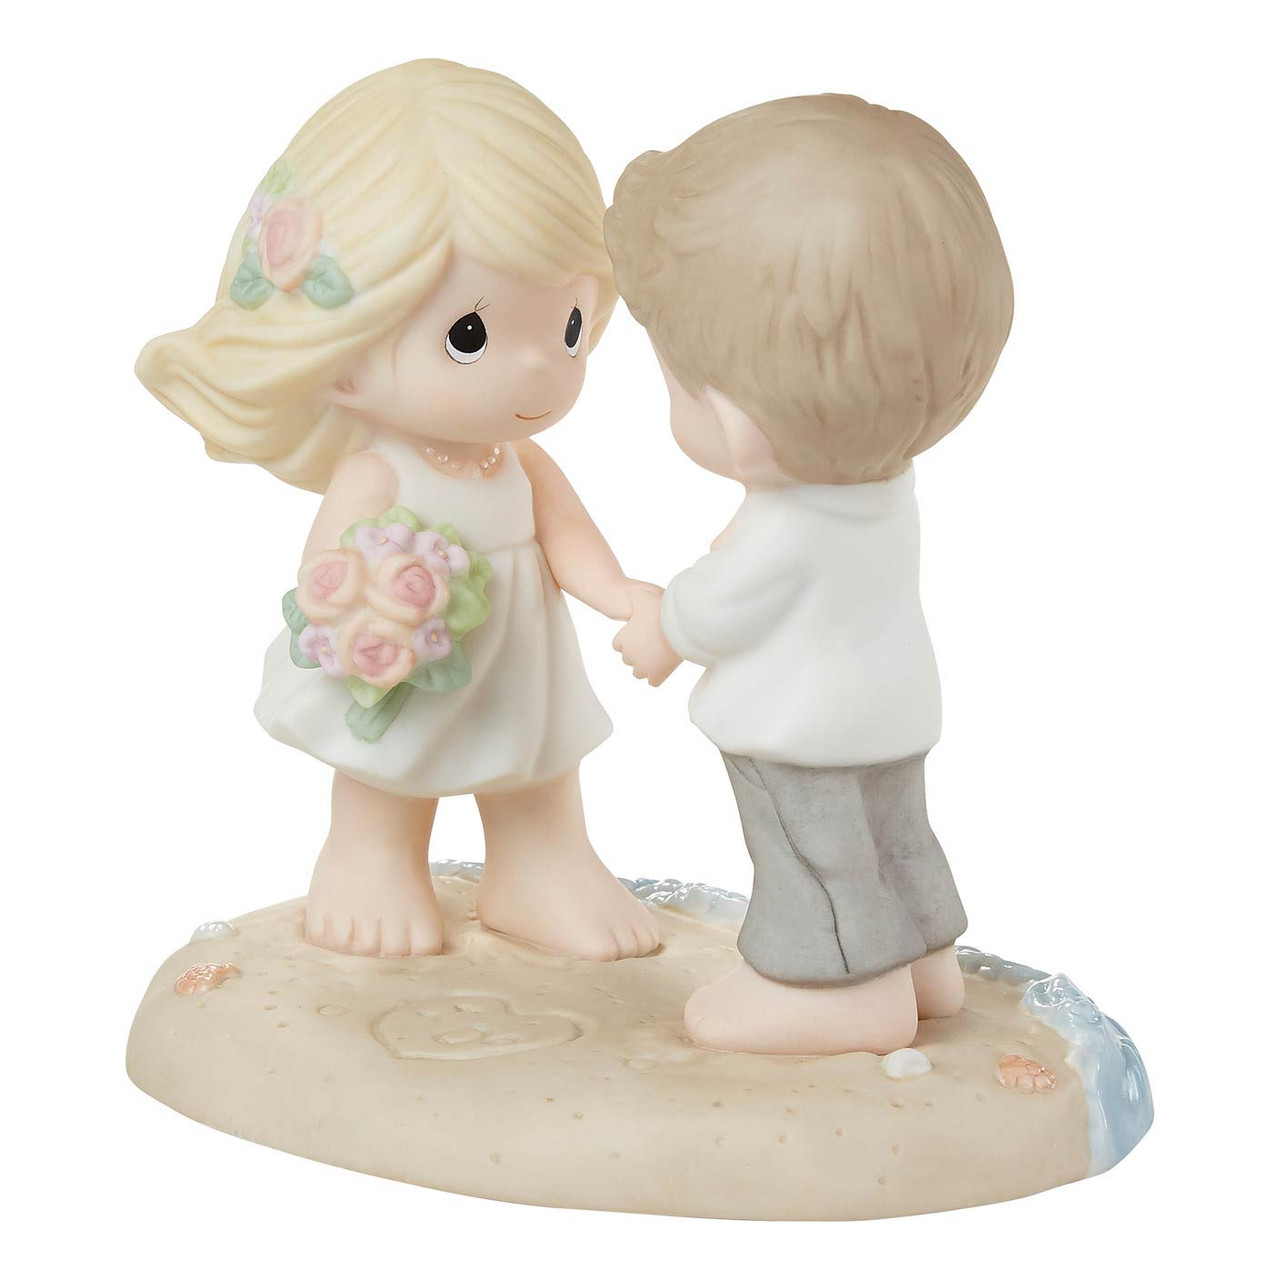 Wedding Gifts For Couple Couple Statue Newly Weds On Bench For Couple  Anniversary Pink Blue 